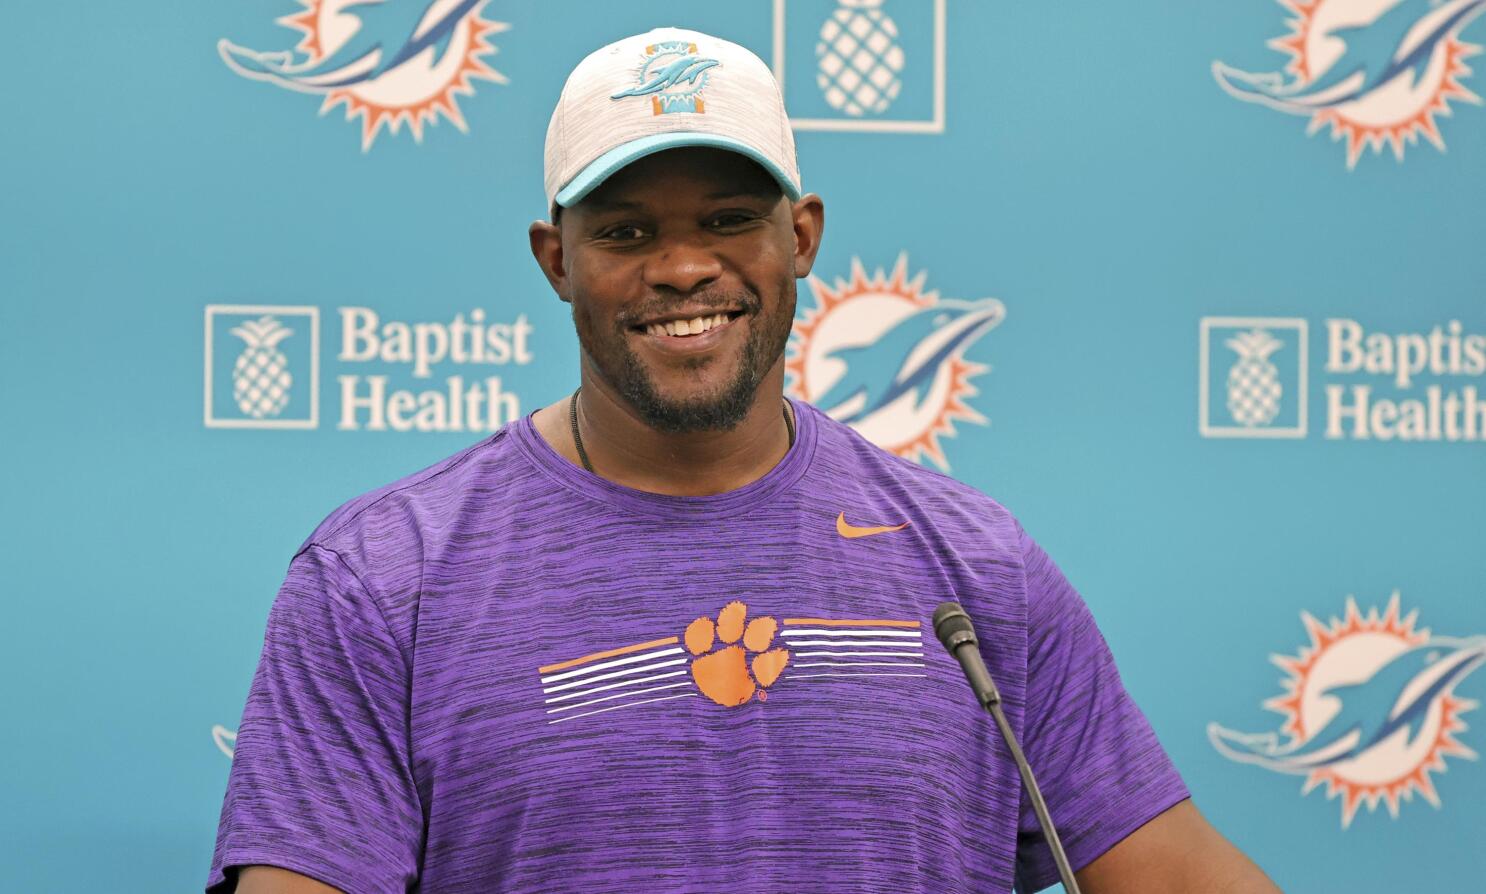 No smoking: Dolphins' London trip stirs memories for Flores